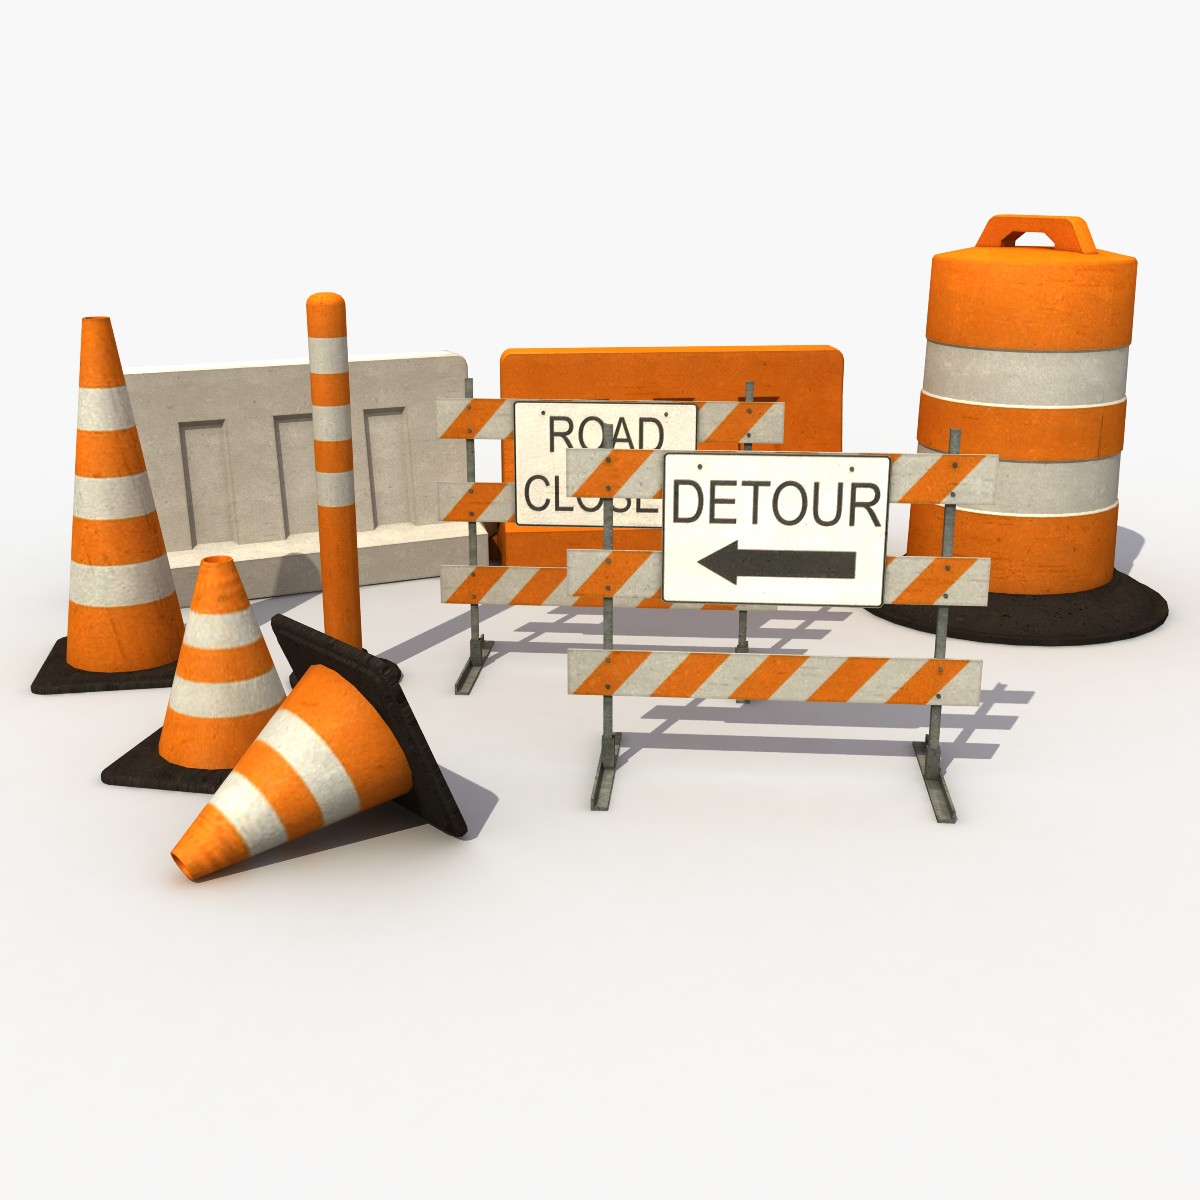 Traffic Barriers	